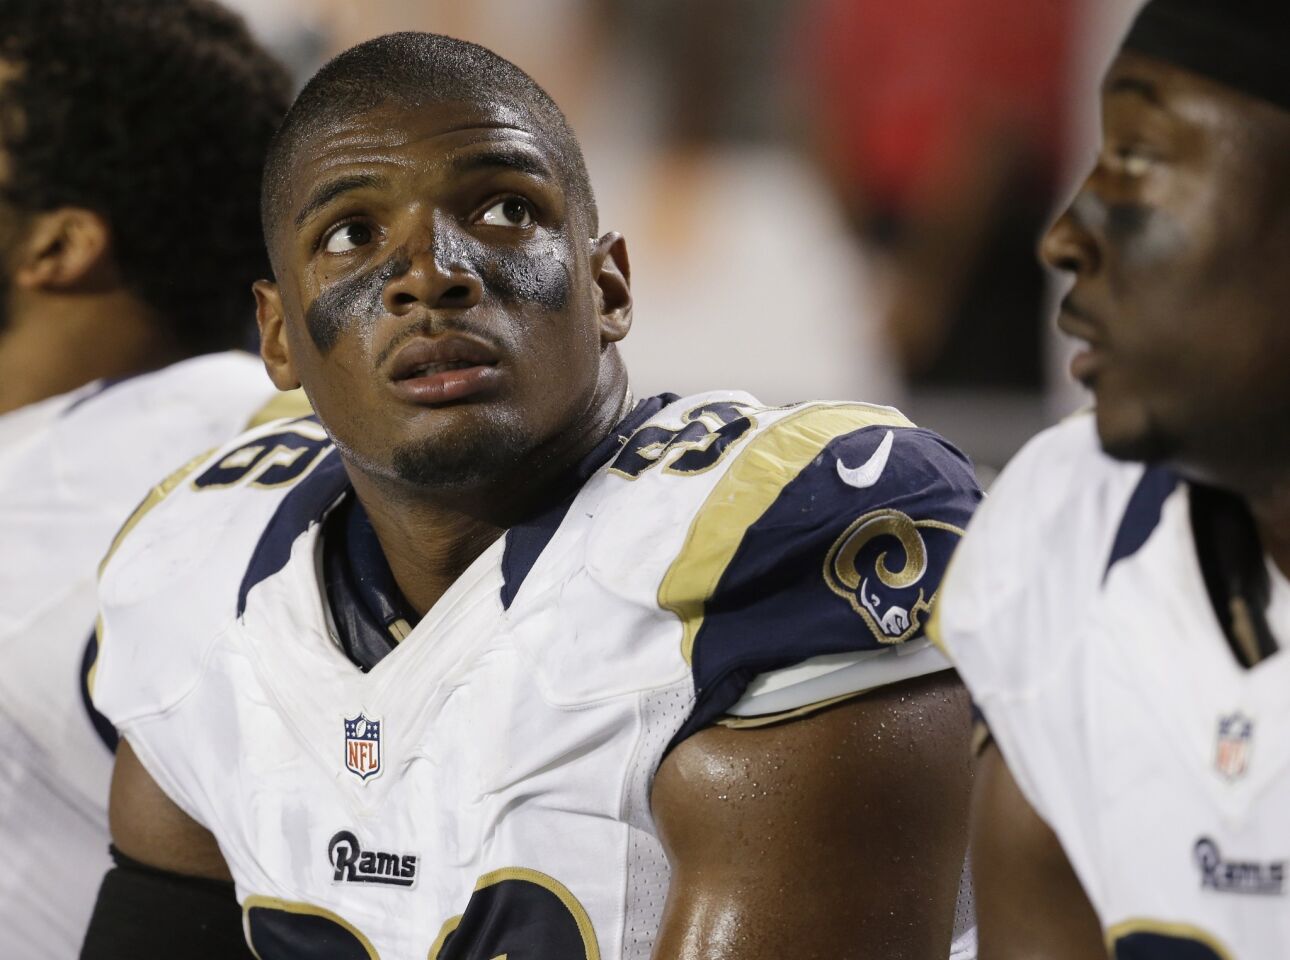 St. Louis Rams defensive end Michael Sam looks on during a preseason game against the Miami Dolphins on Thursday.